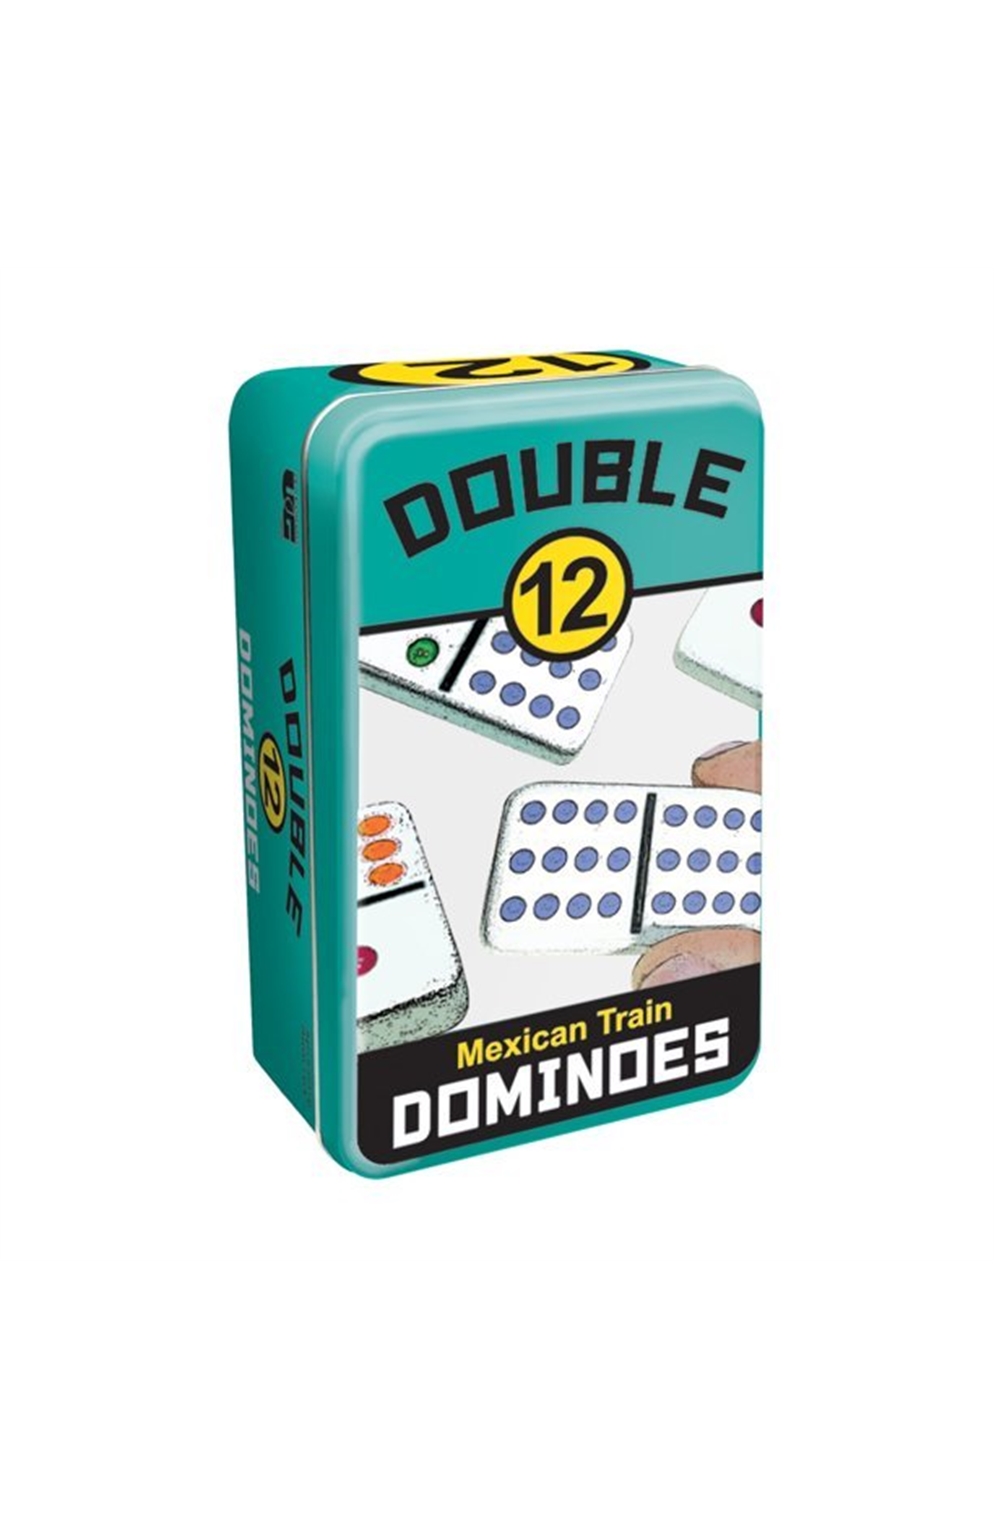 Dominoes: Double 12 Mexican Train